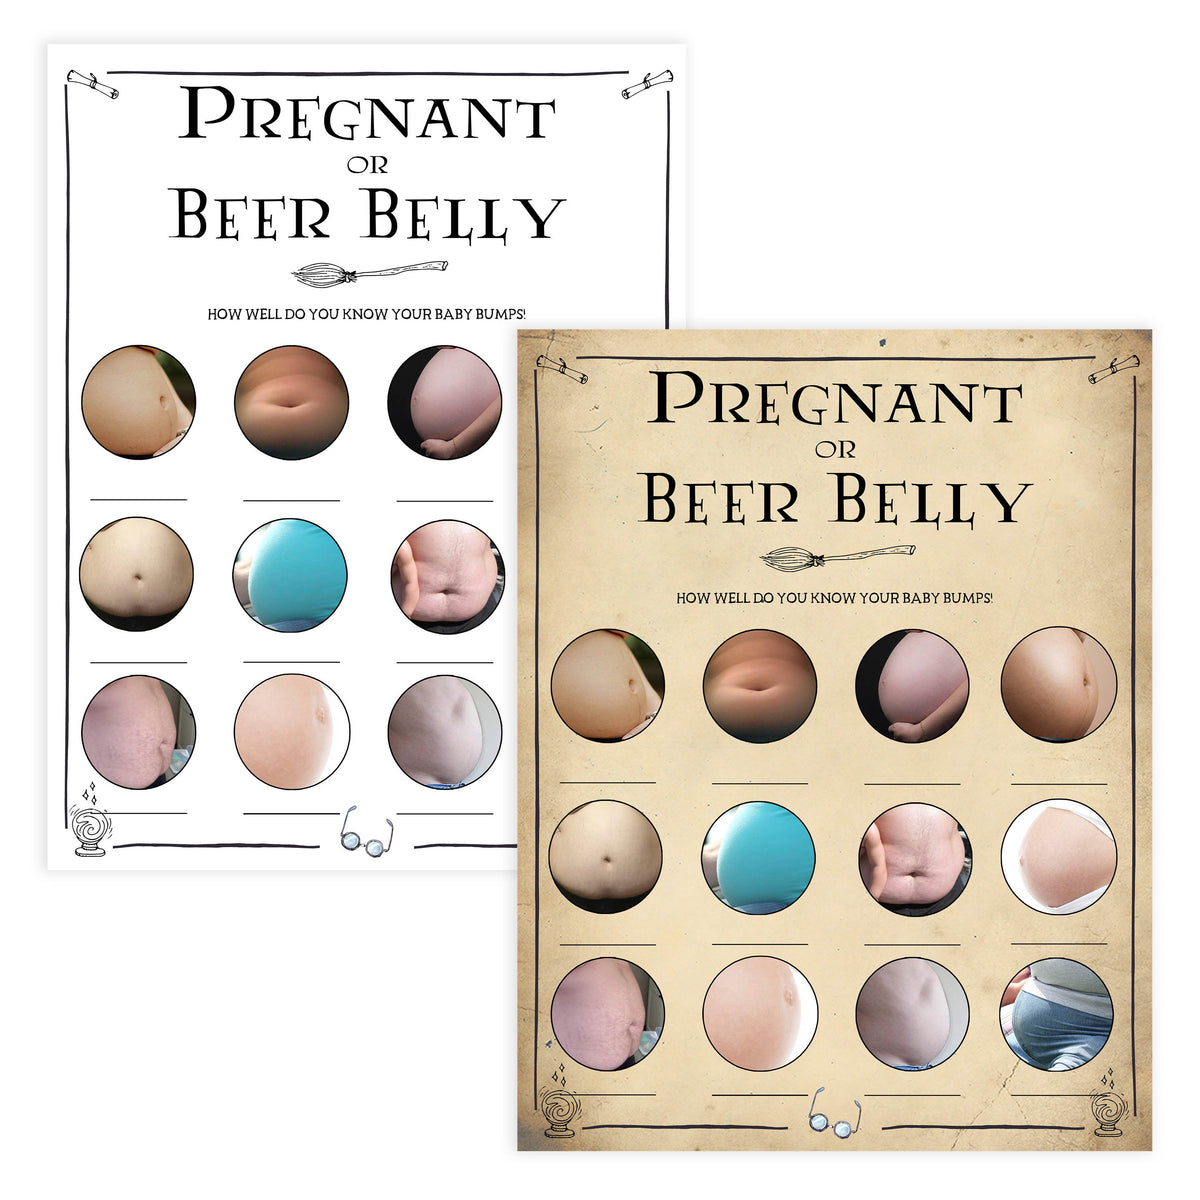 Pregnant or Beer Belly Game, Wizard baby shower games, printable baby shower games, Harry Potter baby games, Harry Potter baby shower, fun baby shower games,  fun baby ideas